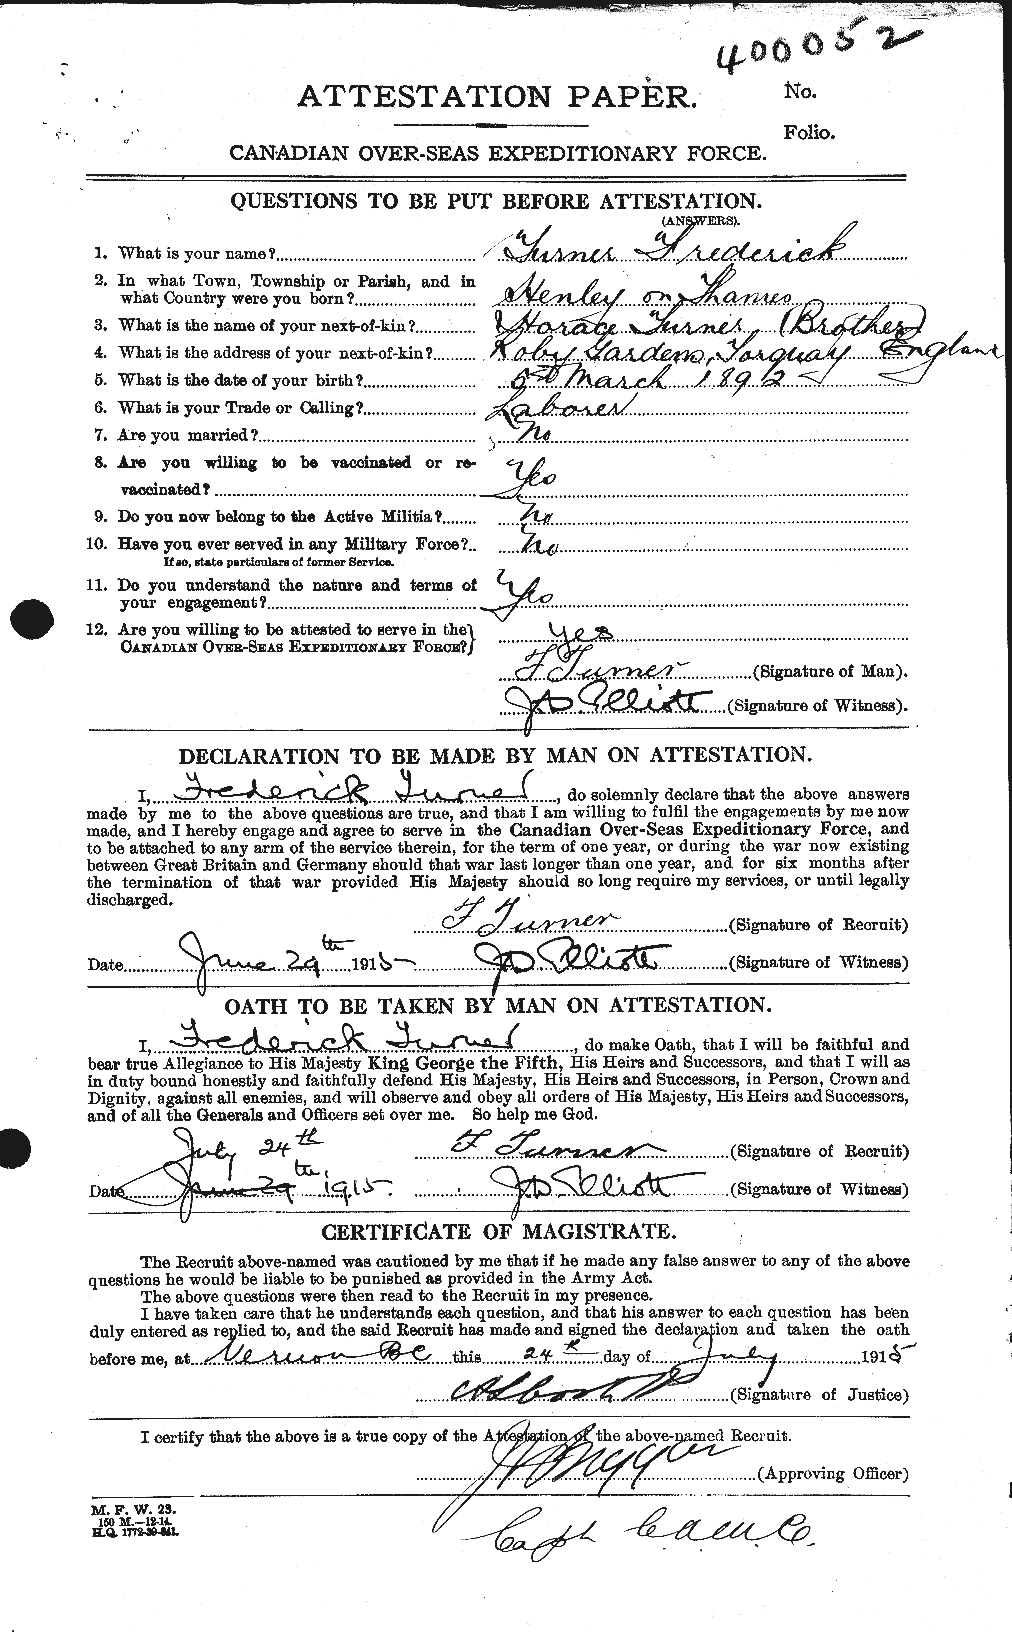 Personnel Records of the First World War - CEF 648463a